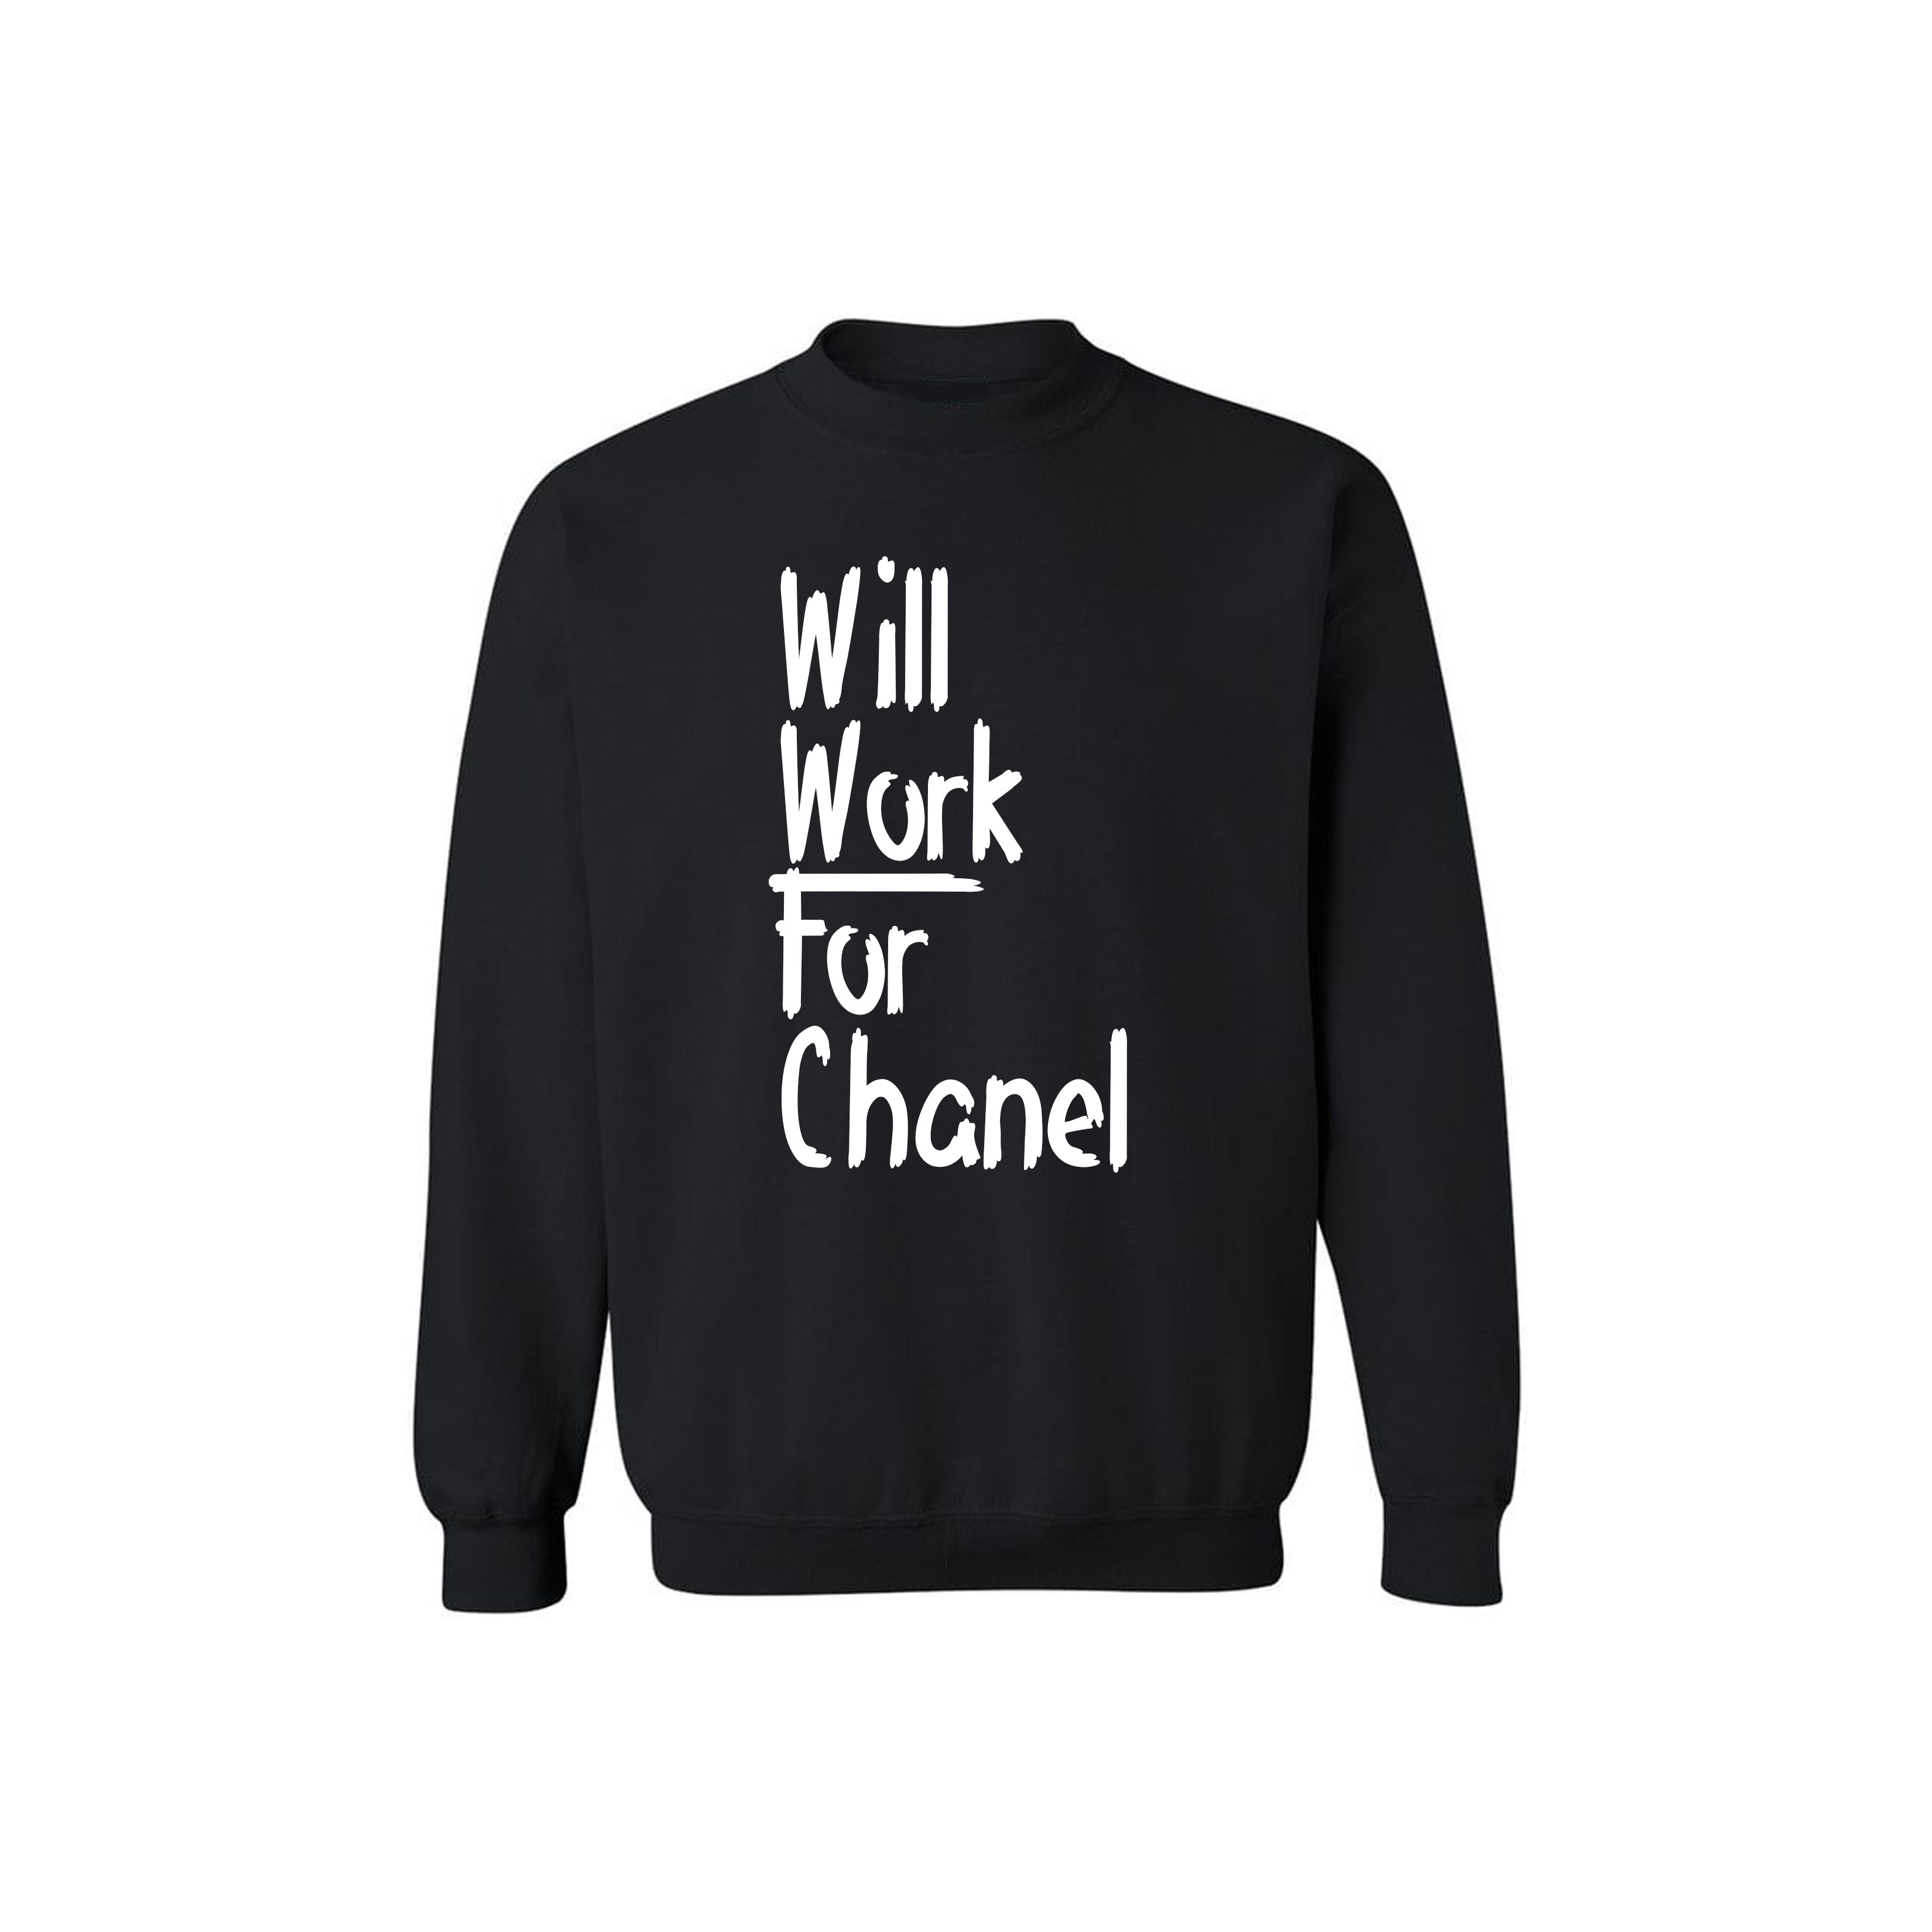 Will Work for Chanel Sweatshirt (Various Colors)